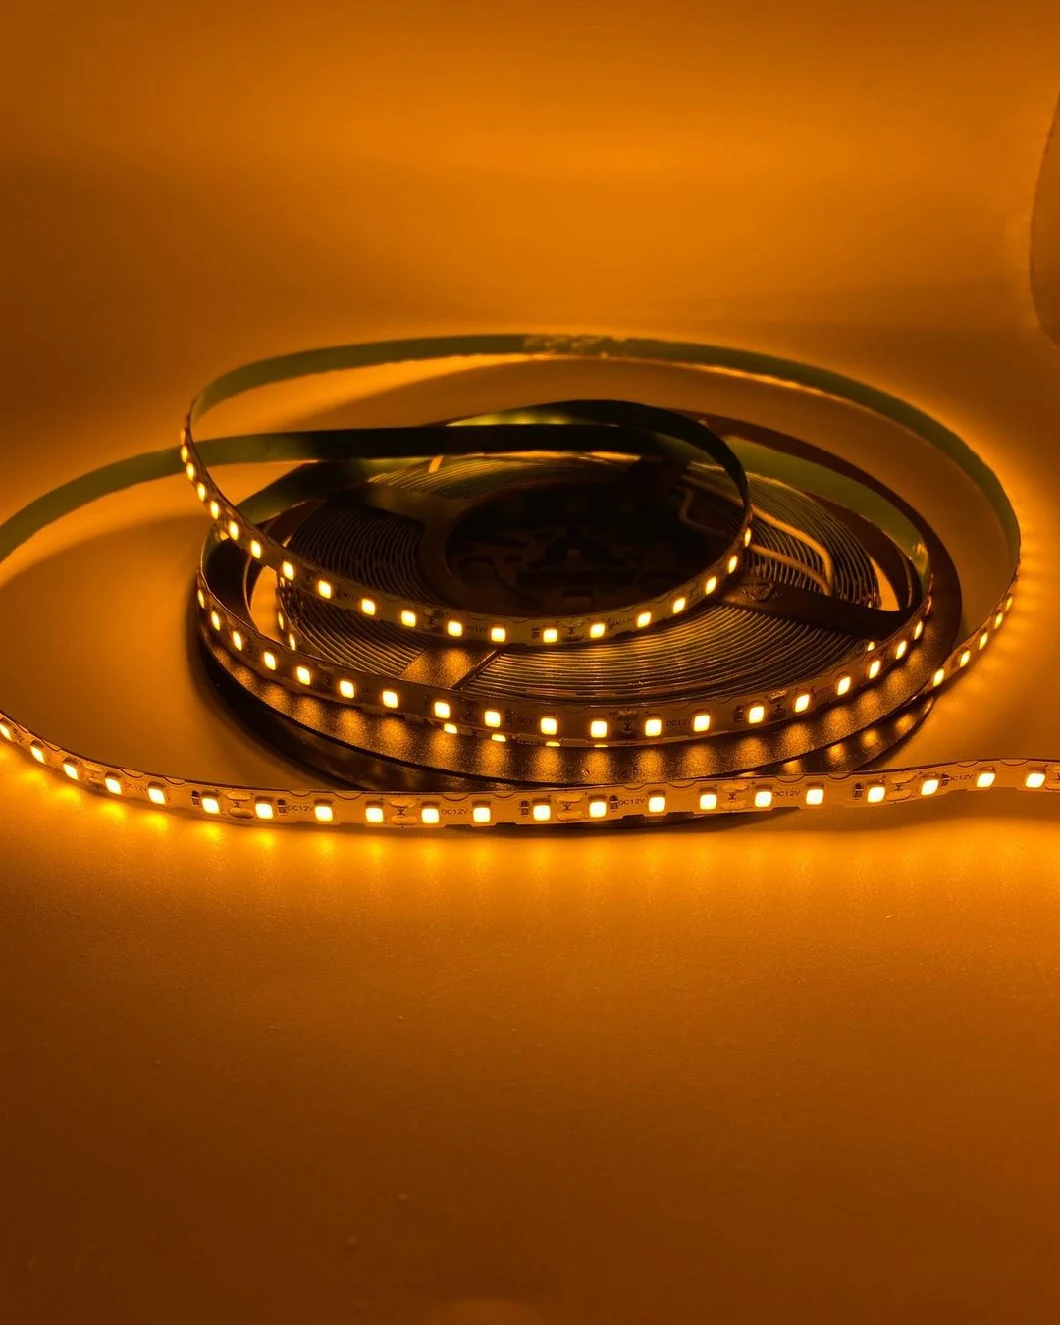 Professional Manufacturers Imported Transparent Clear LED Strip Light Potting Soft Epoxy Resin